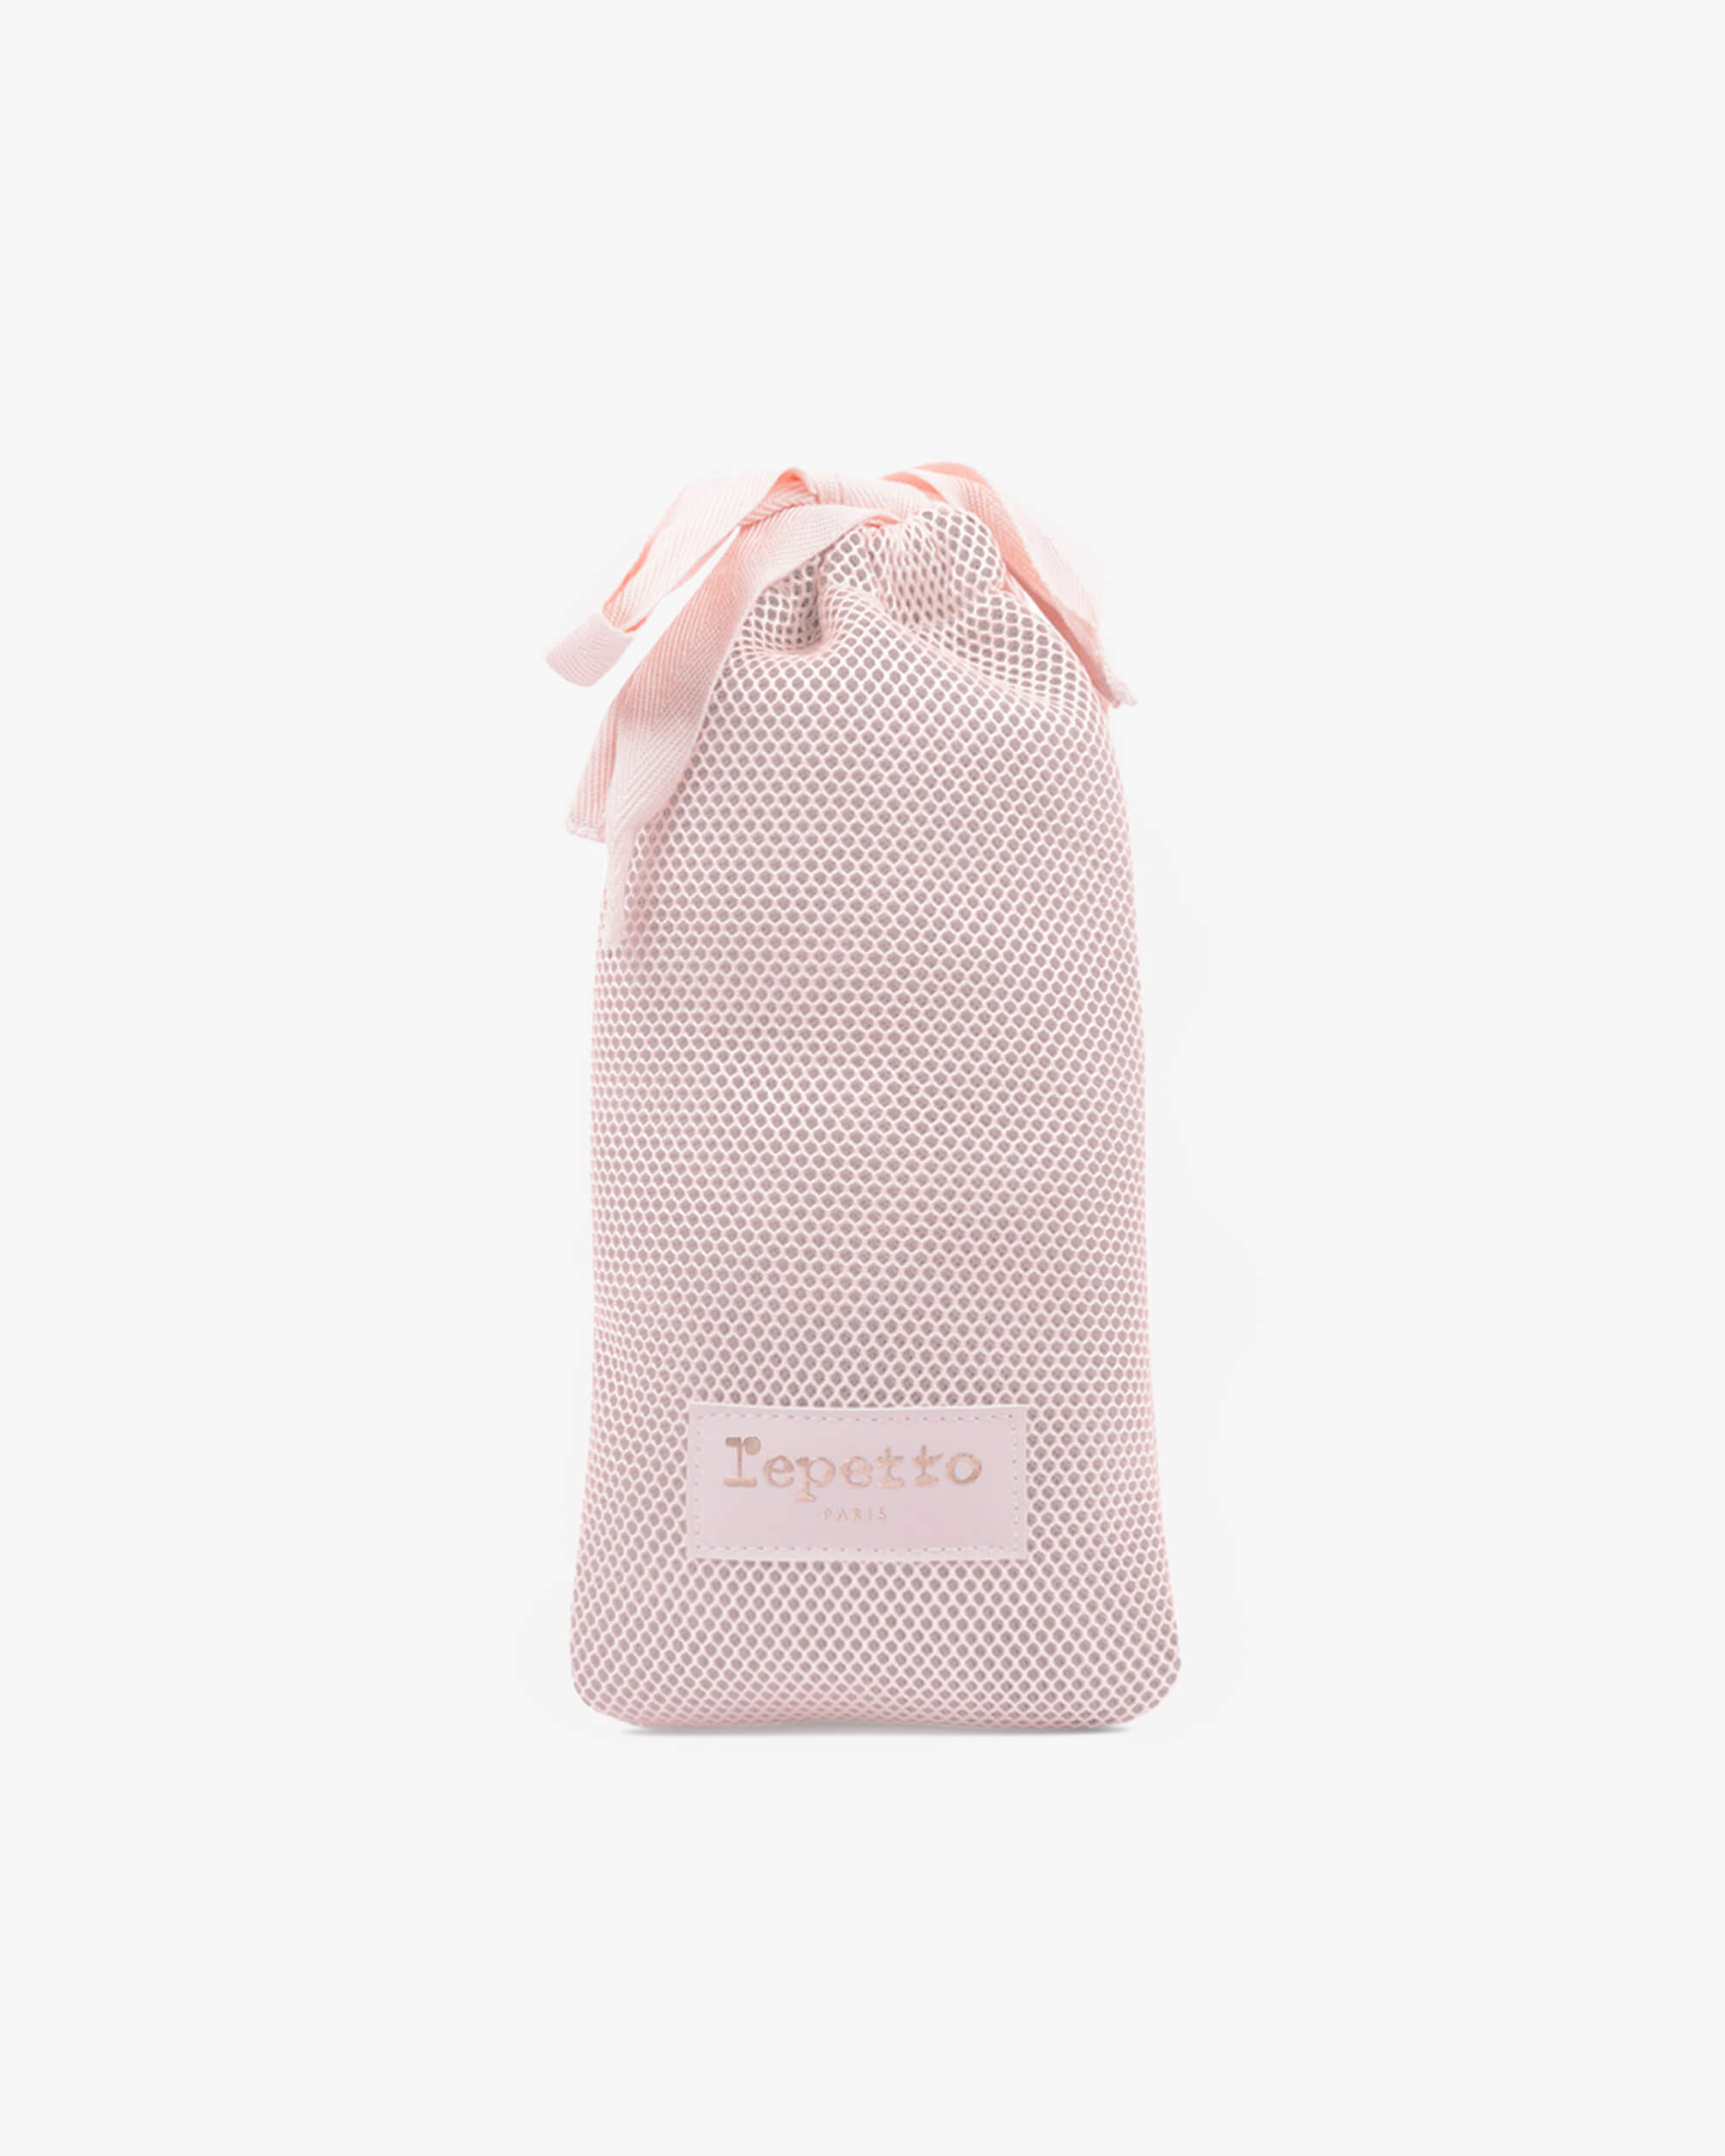 Serenity ballet shoes pouch